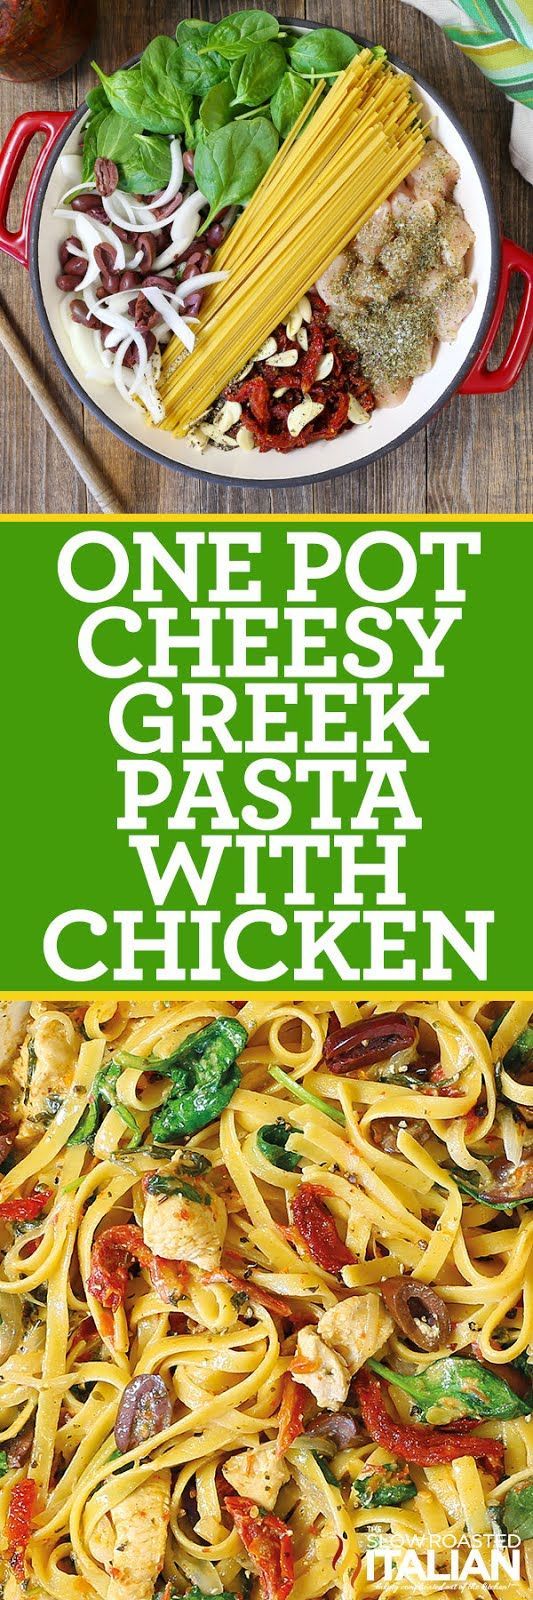 One-Pot Cheesy Greek Pasta with Chicken (With VIDEO AND GIVEAWAY) One-Pot Cheesy Greek Pasta with Chicken is a simple recipe